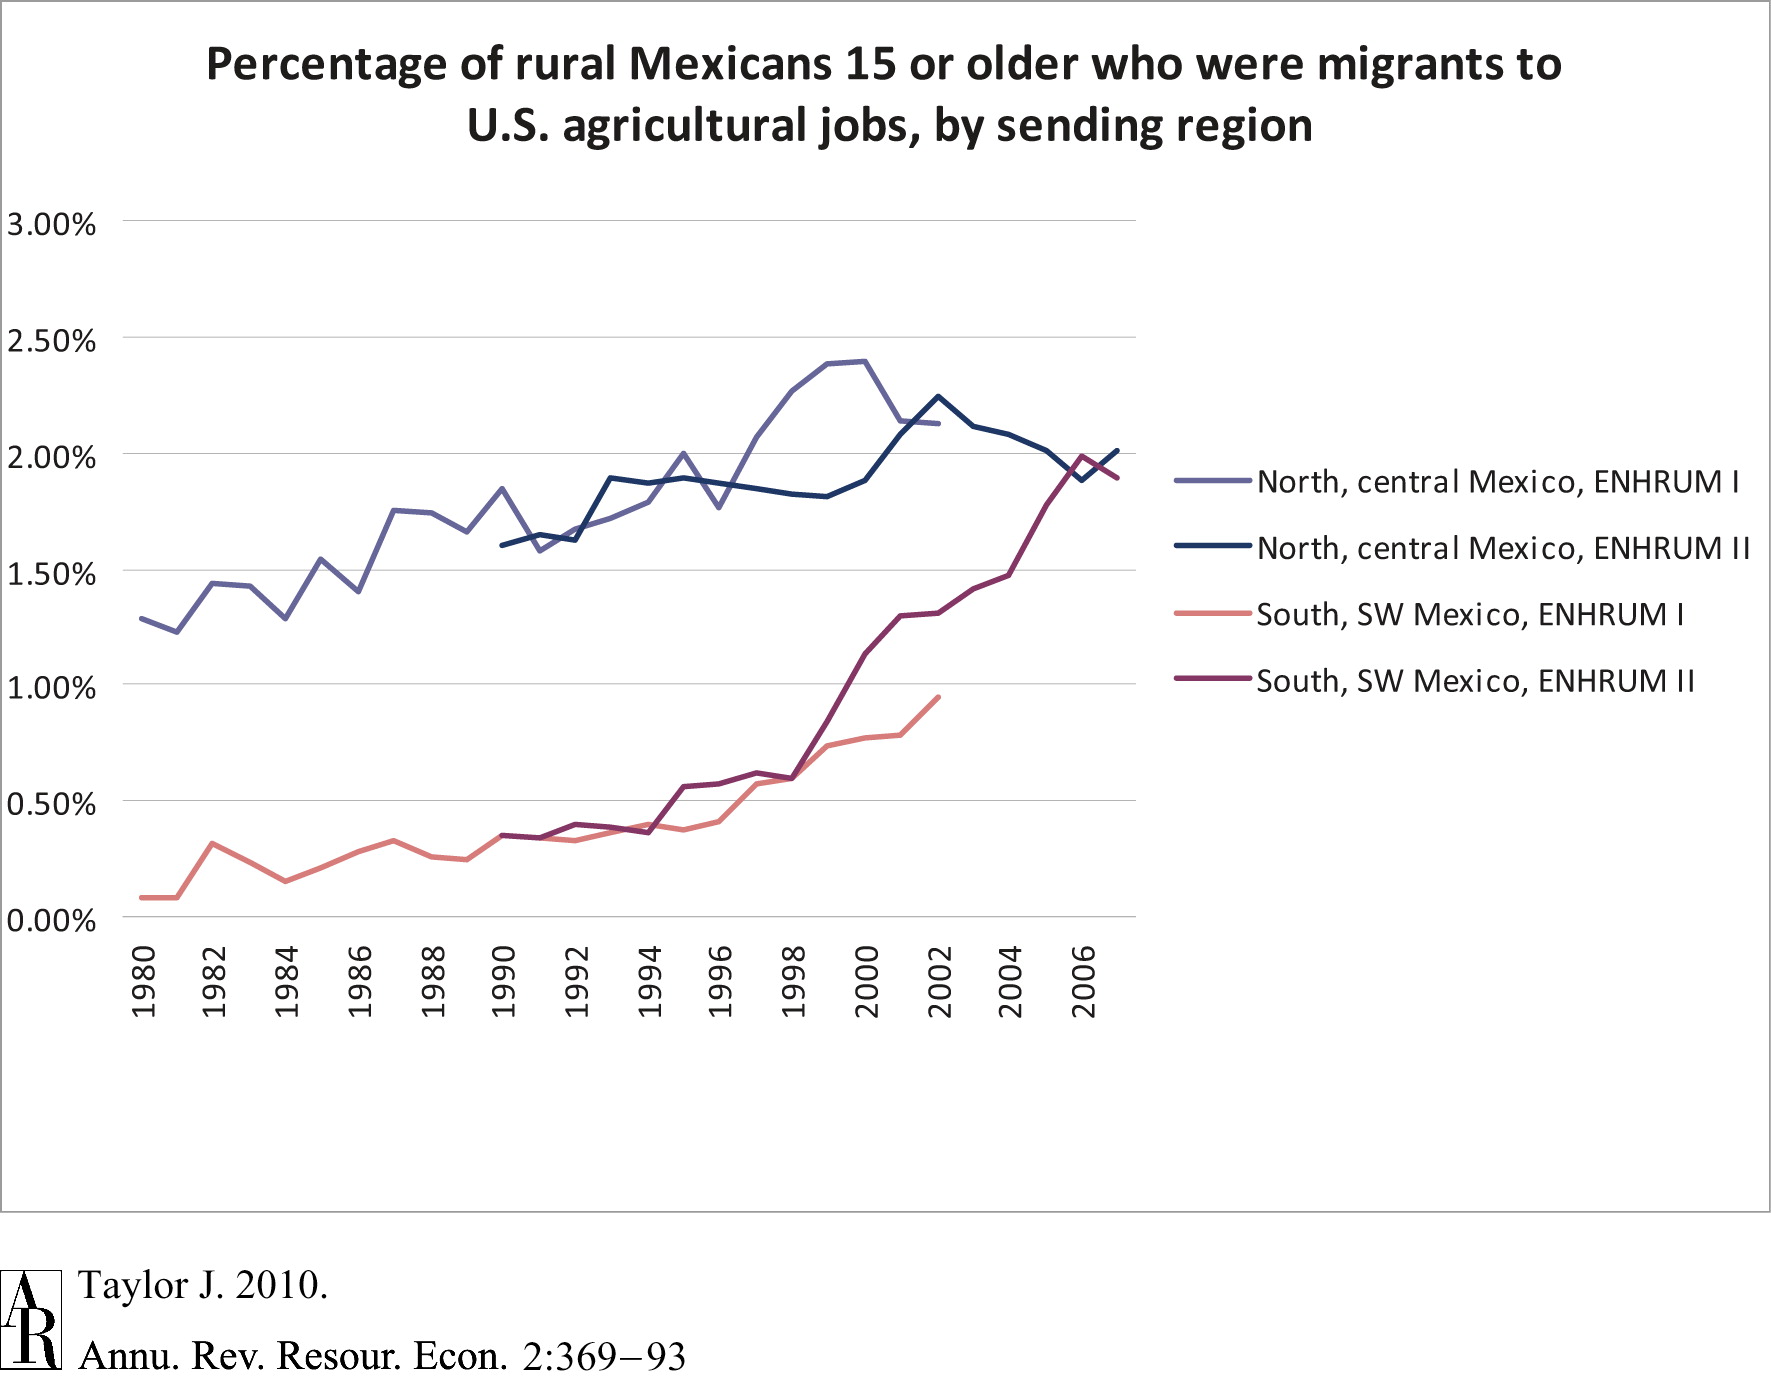 Line graph showing percentage of rural mexicans 15 or older who were migrants to U.S. agricultural jobs, by sending region.